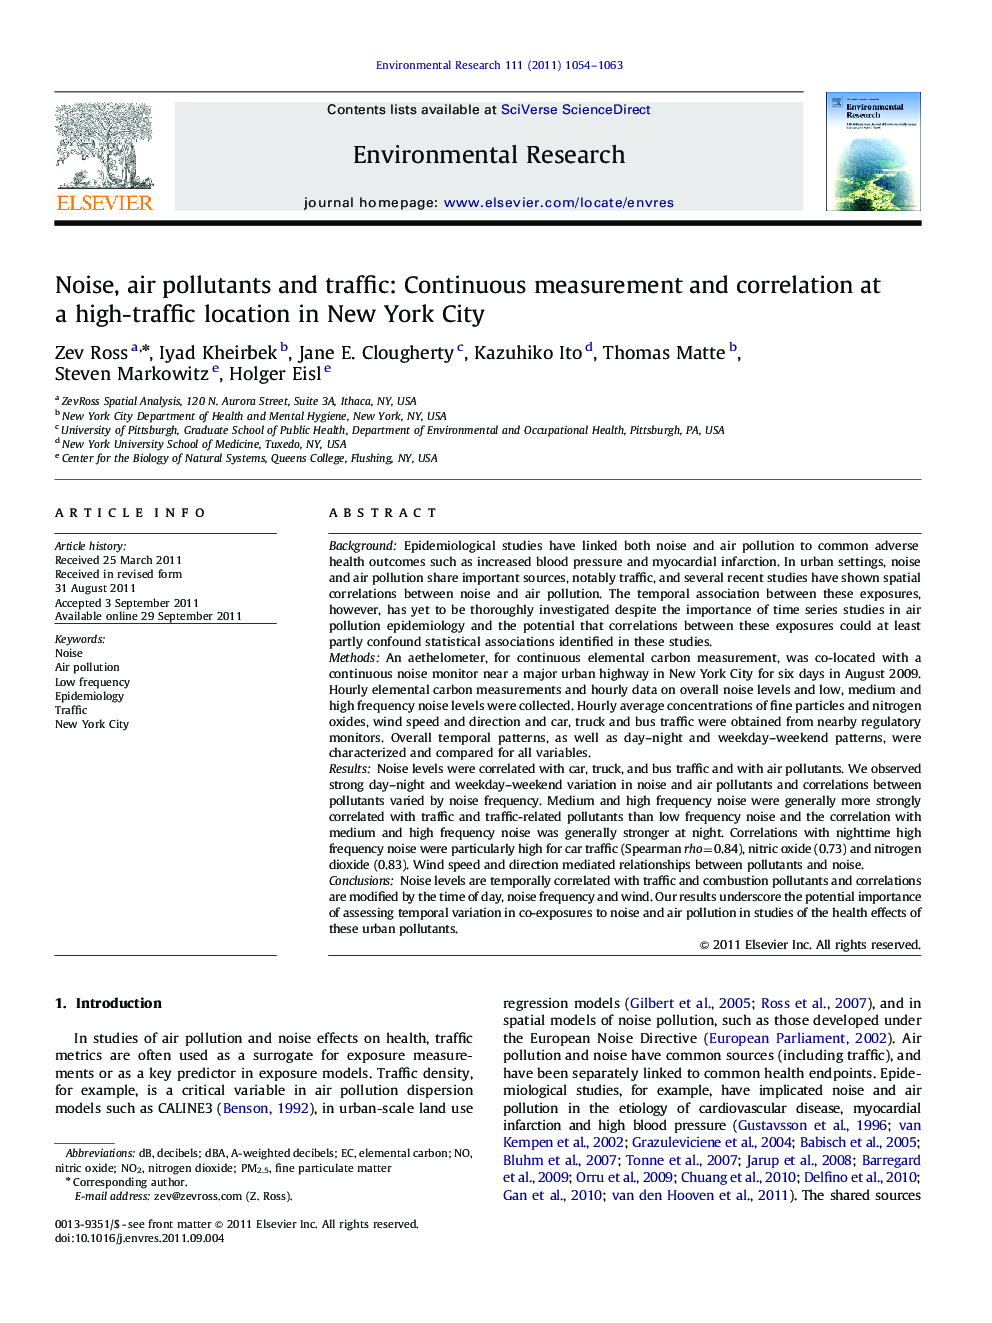 Noise, air pollutants and traffic: Continuous measurement and correlation at a high-traffic location in New York City